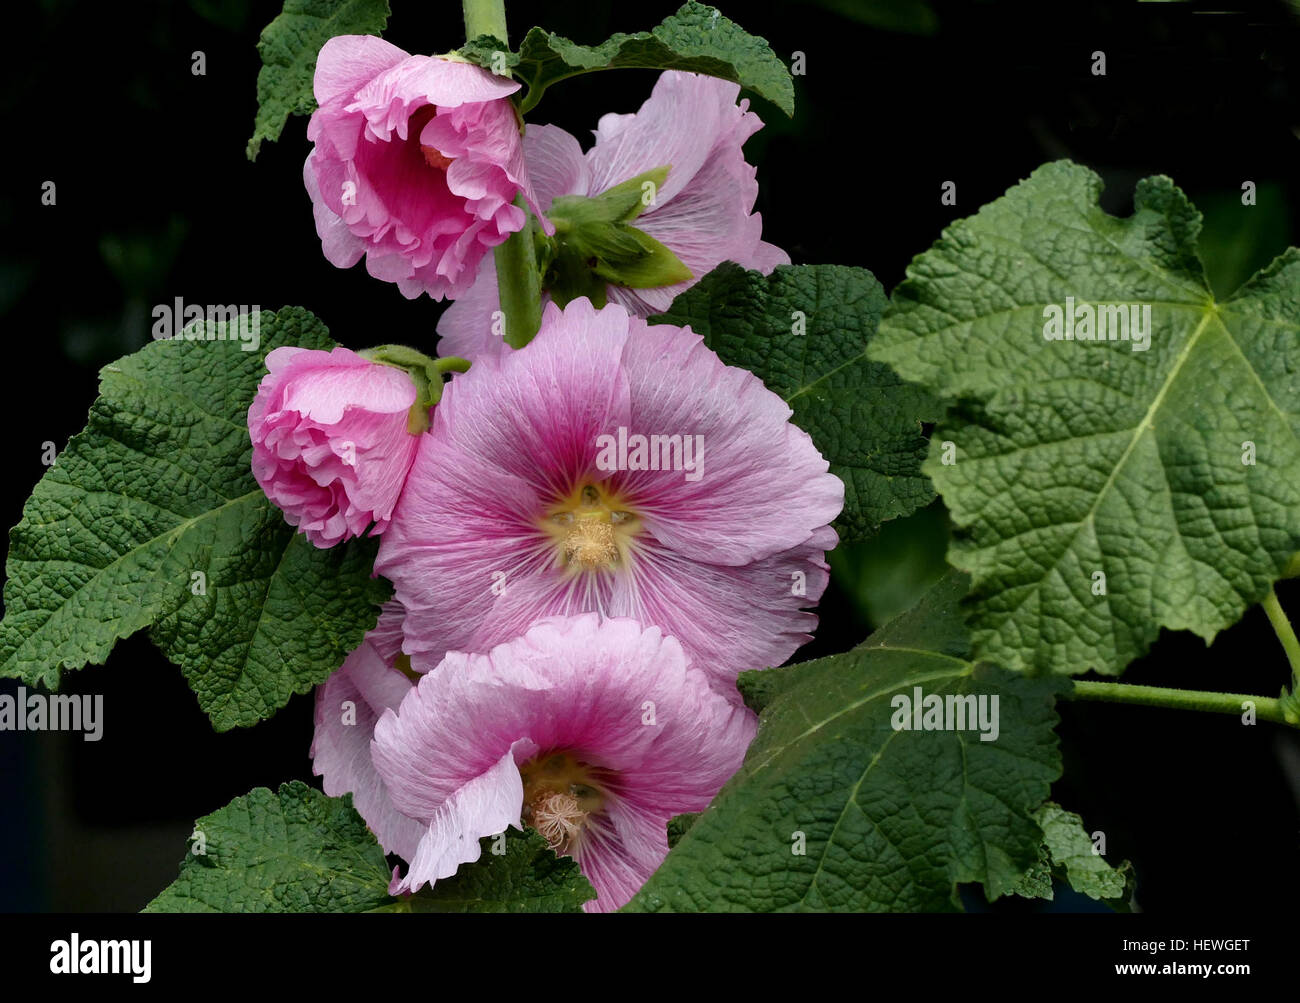 Growing hollyhocks (Alcea rosea) in the garden is the goal of many gardeners who remember these impressive flowers from their youth. The flower stalks on hollyhocks can reach heights of 9 feet tall! They can tower above a garden, adding a lovely vertical element to your yard. Stock Photo